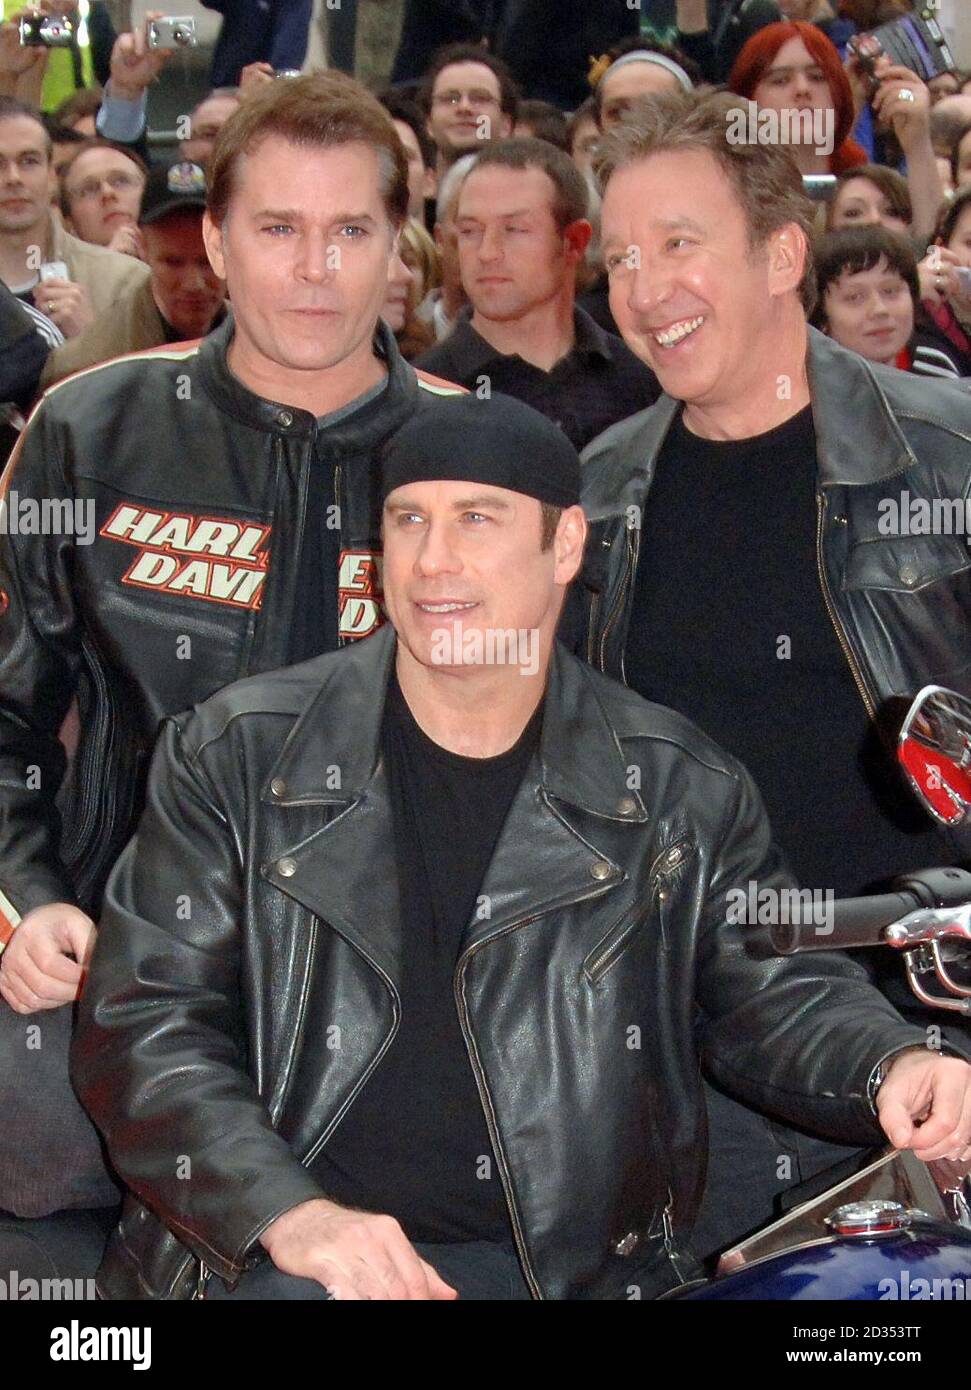 (From left to right) Ray Liotta, John Travolta and Tim Allen arrive for the UK premiere of Wild Hogs at the Odeon West End in central London. Stock Photo